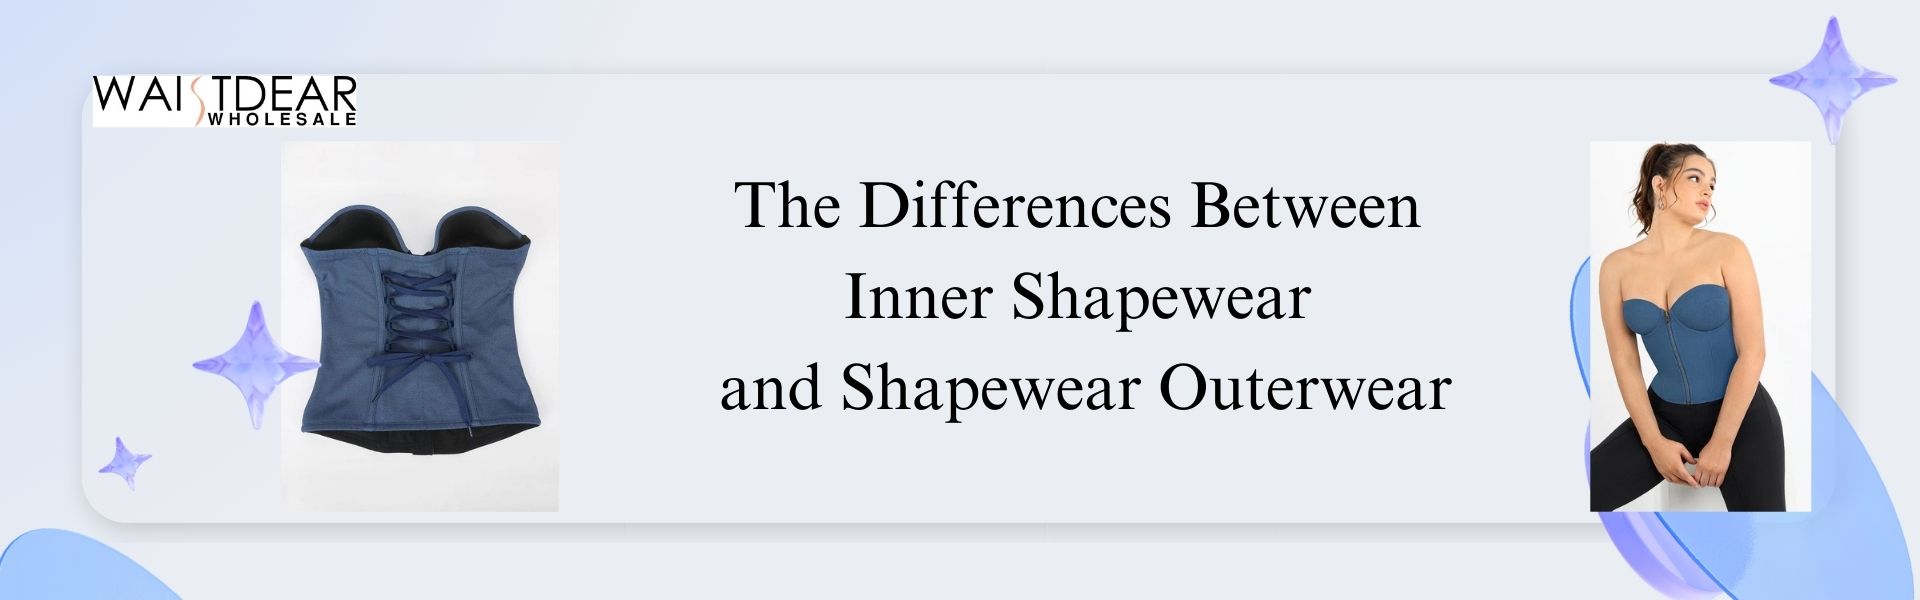 The Differences Between Inner Shapewear and Shapewear